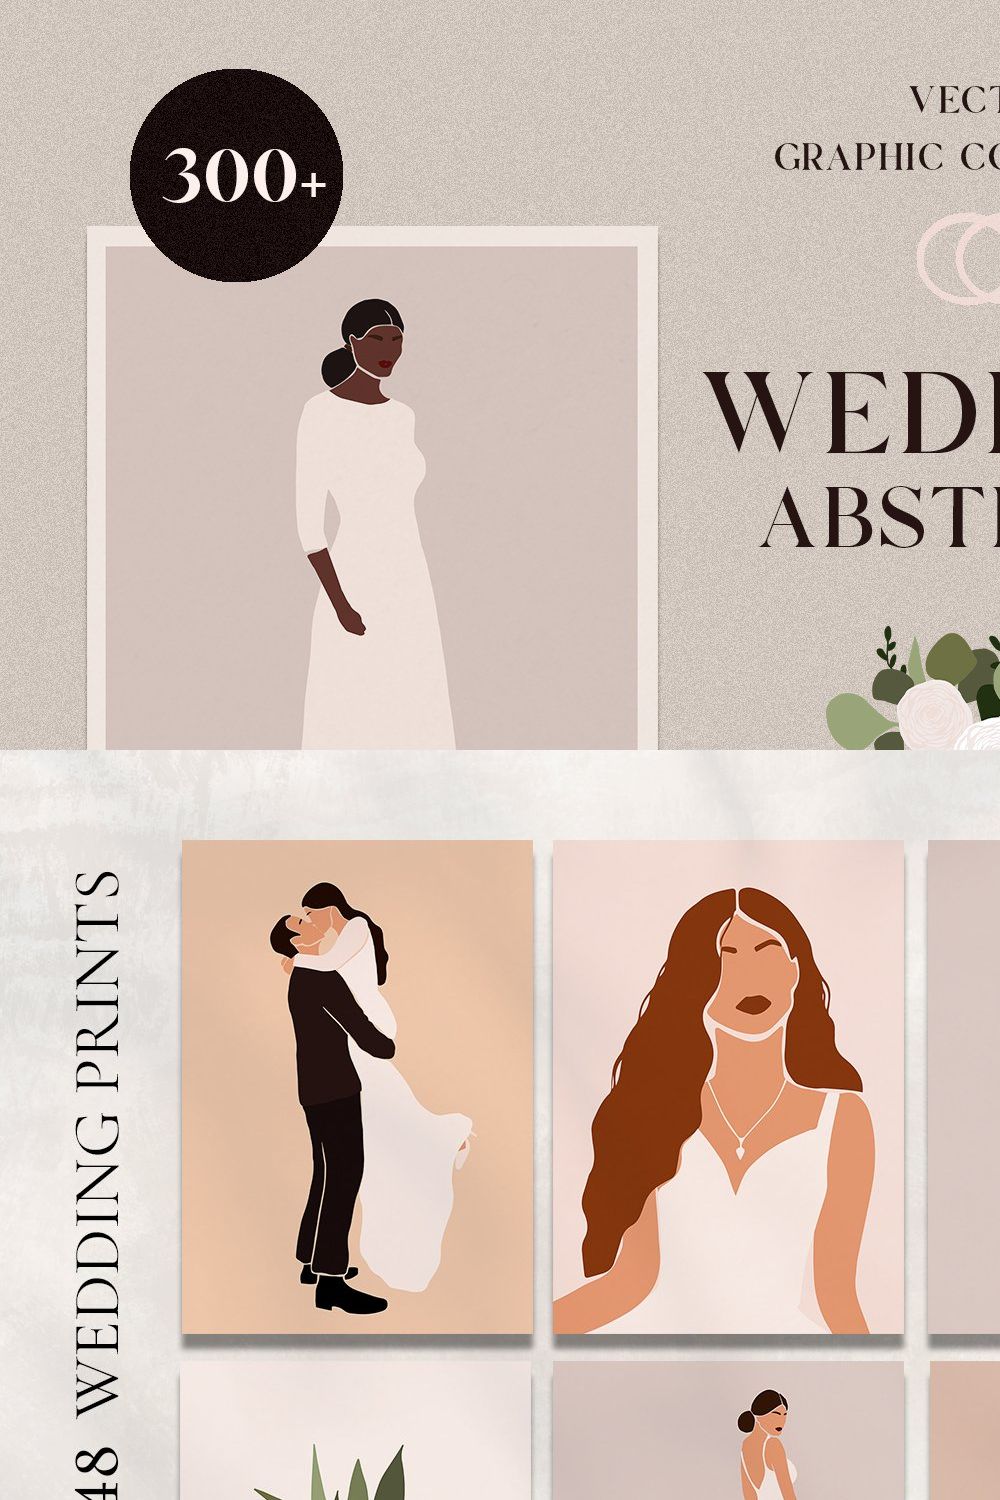 Wedding Abstract graphic collection pinterest preview image.